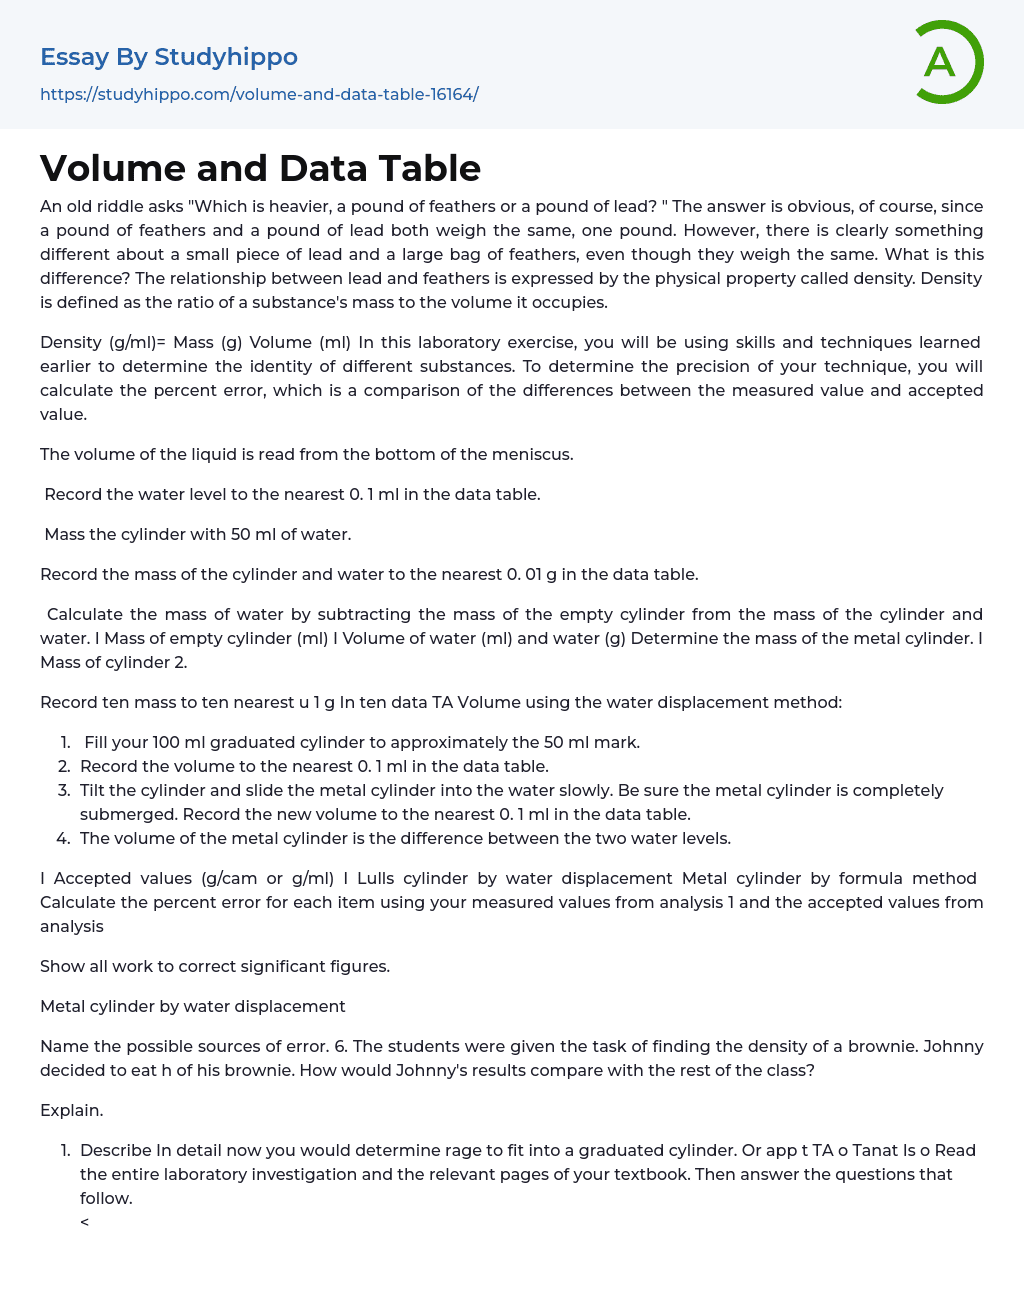 Volume and Data Table Essay Example